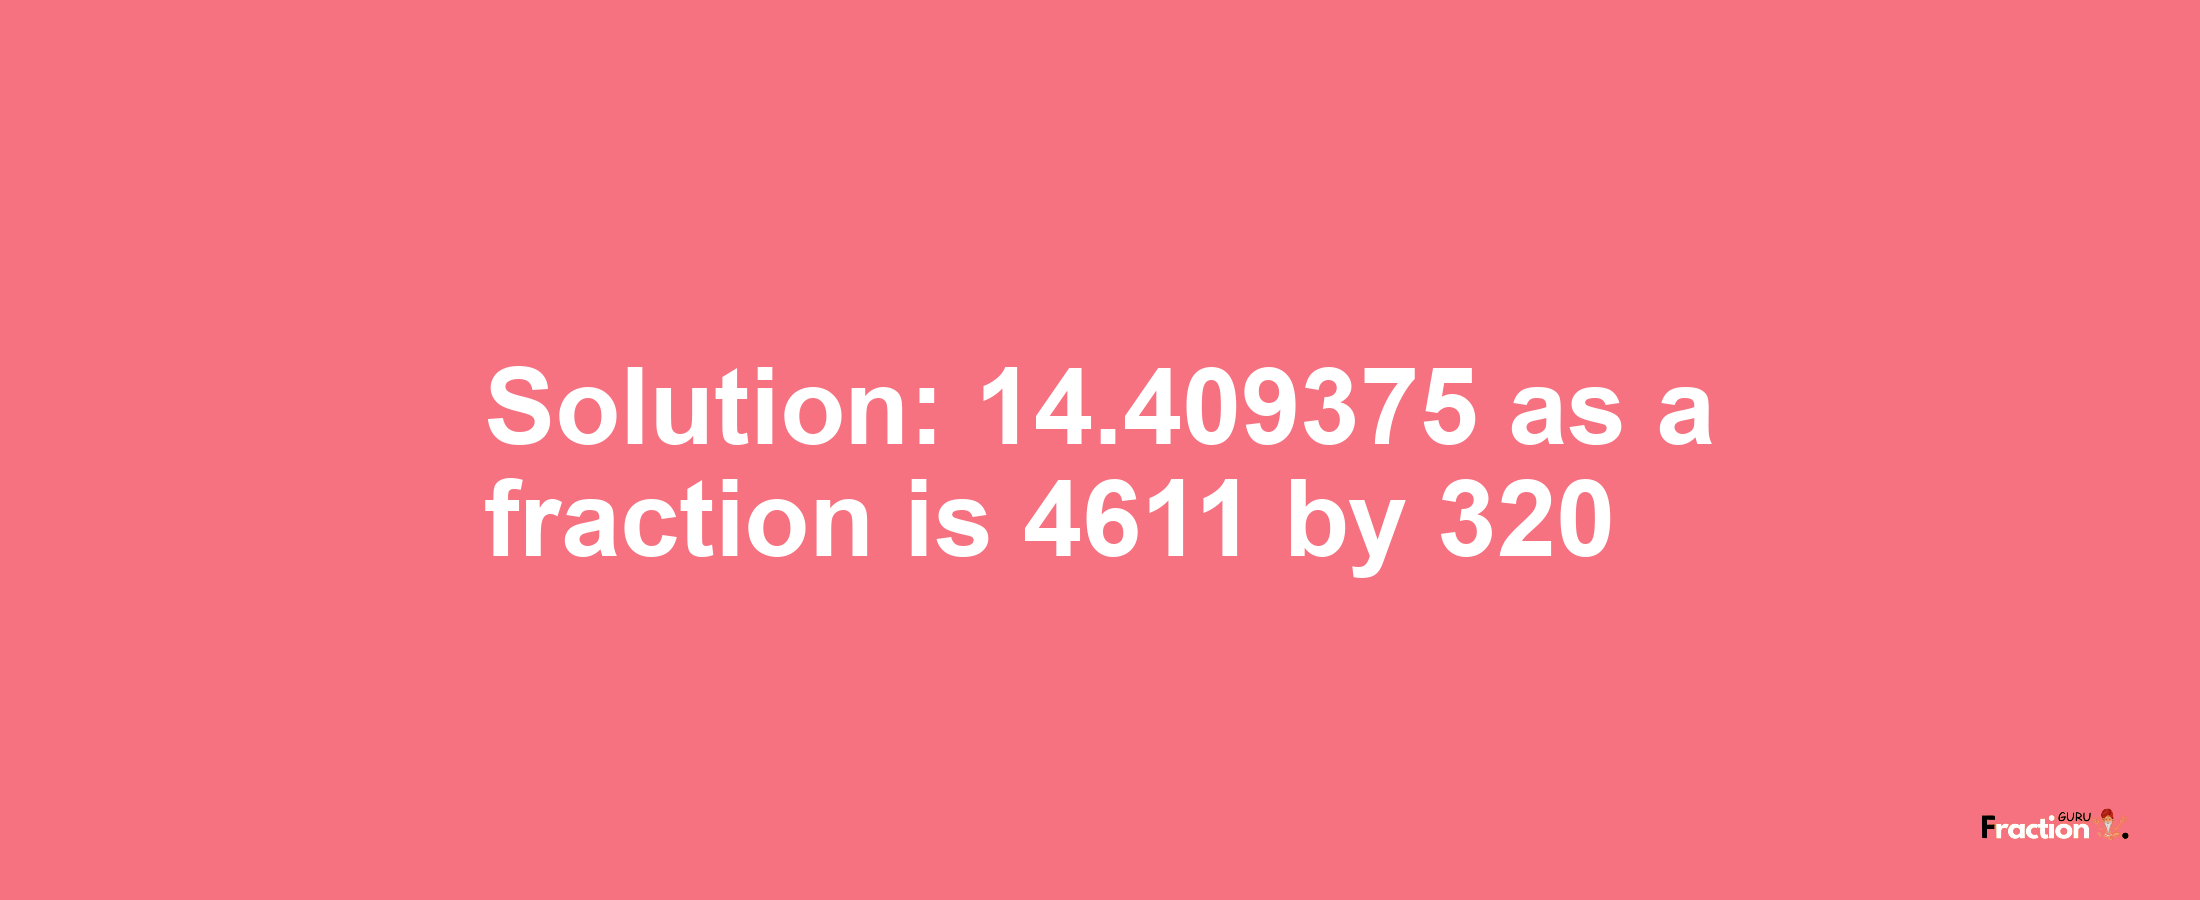 Solution:14.409375 as a fraction is 4611/320